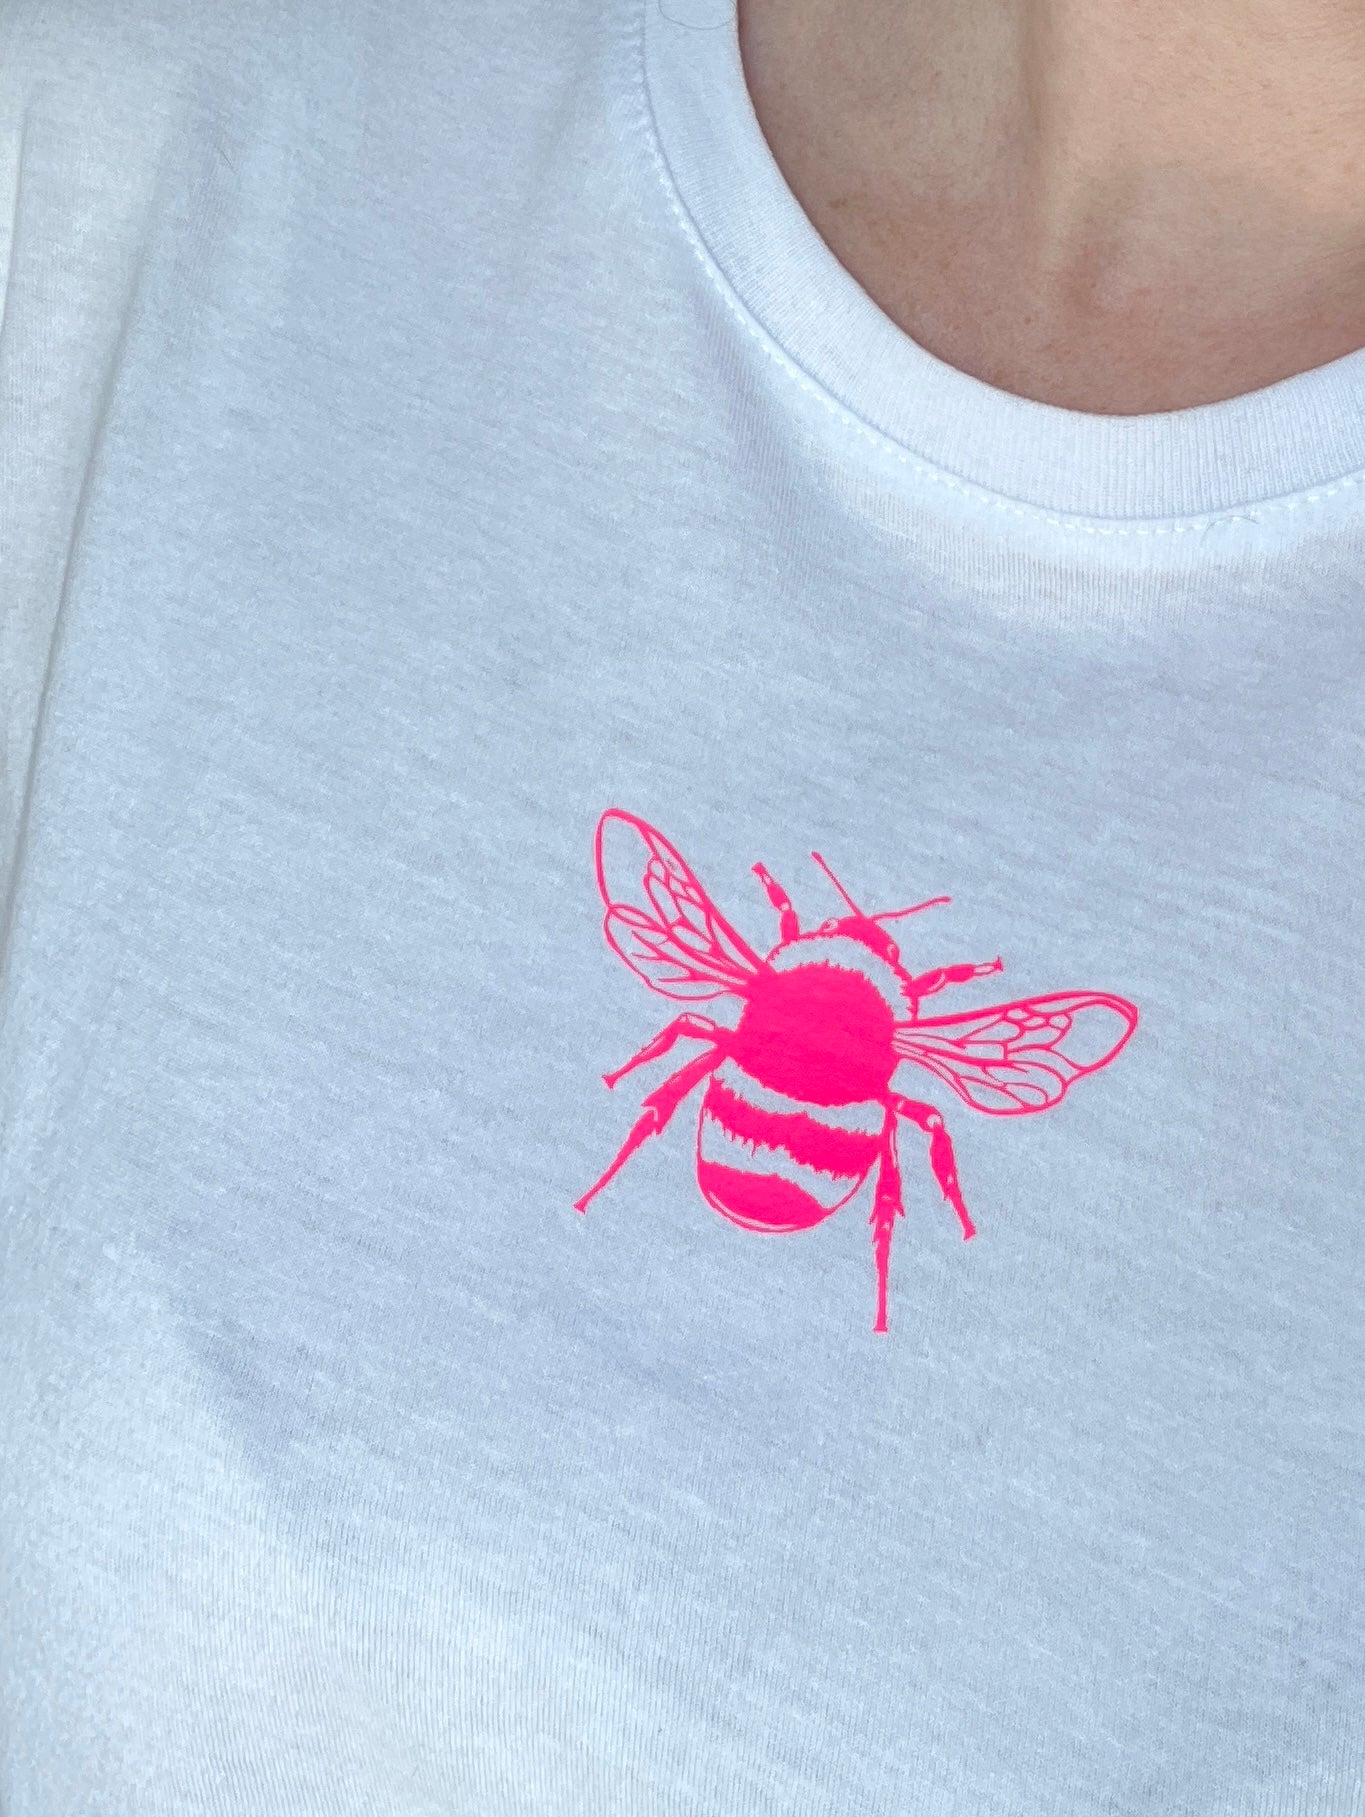 The Bee T-shirt